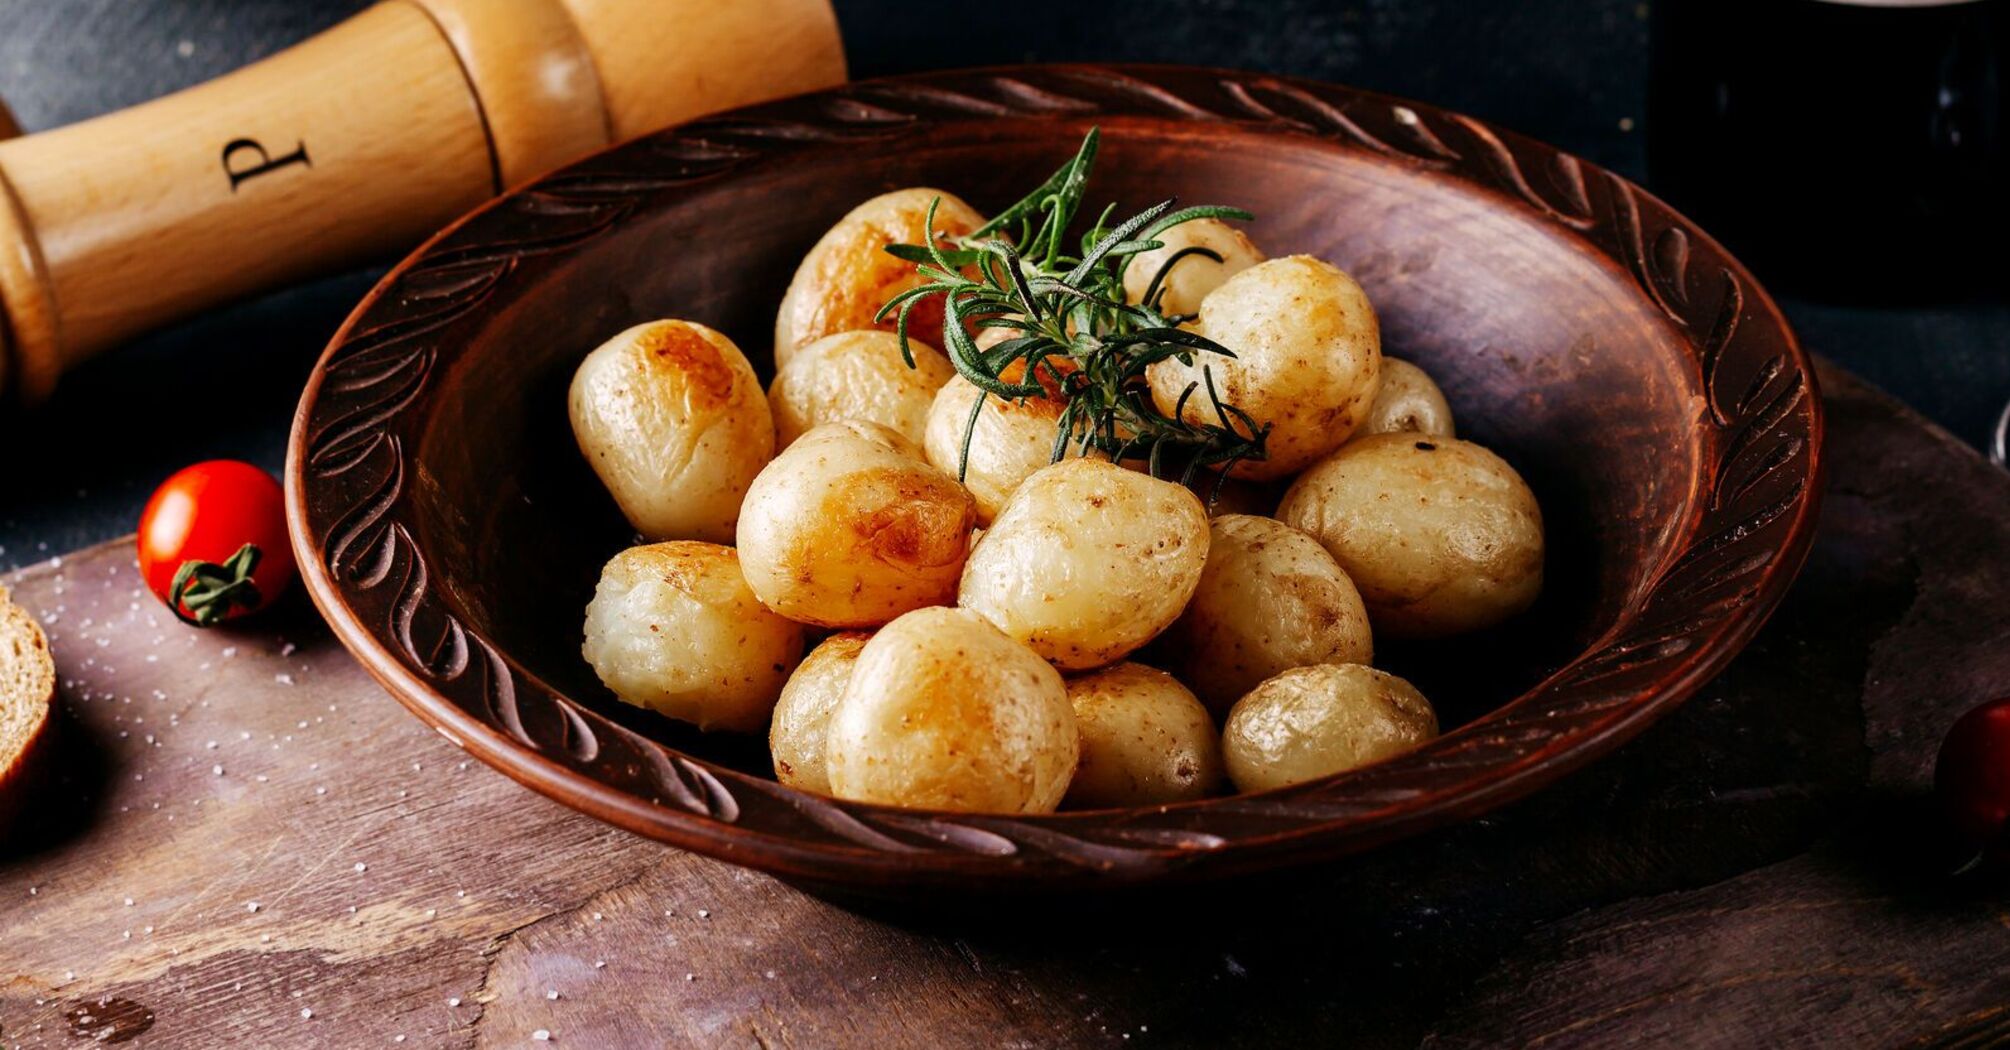 Roasted young potatoes with garlic: they have never tasted better